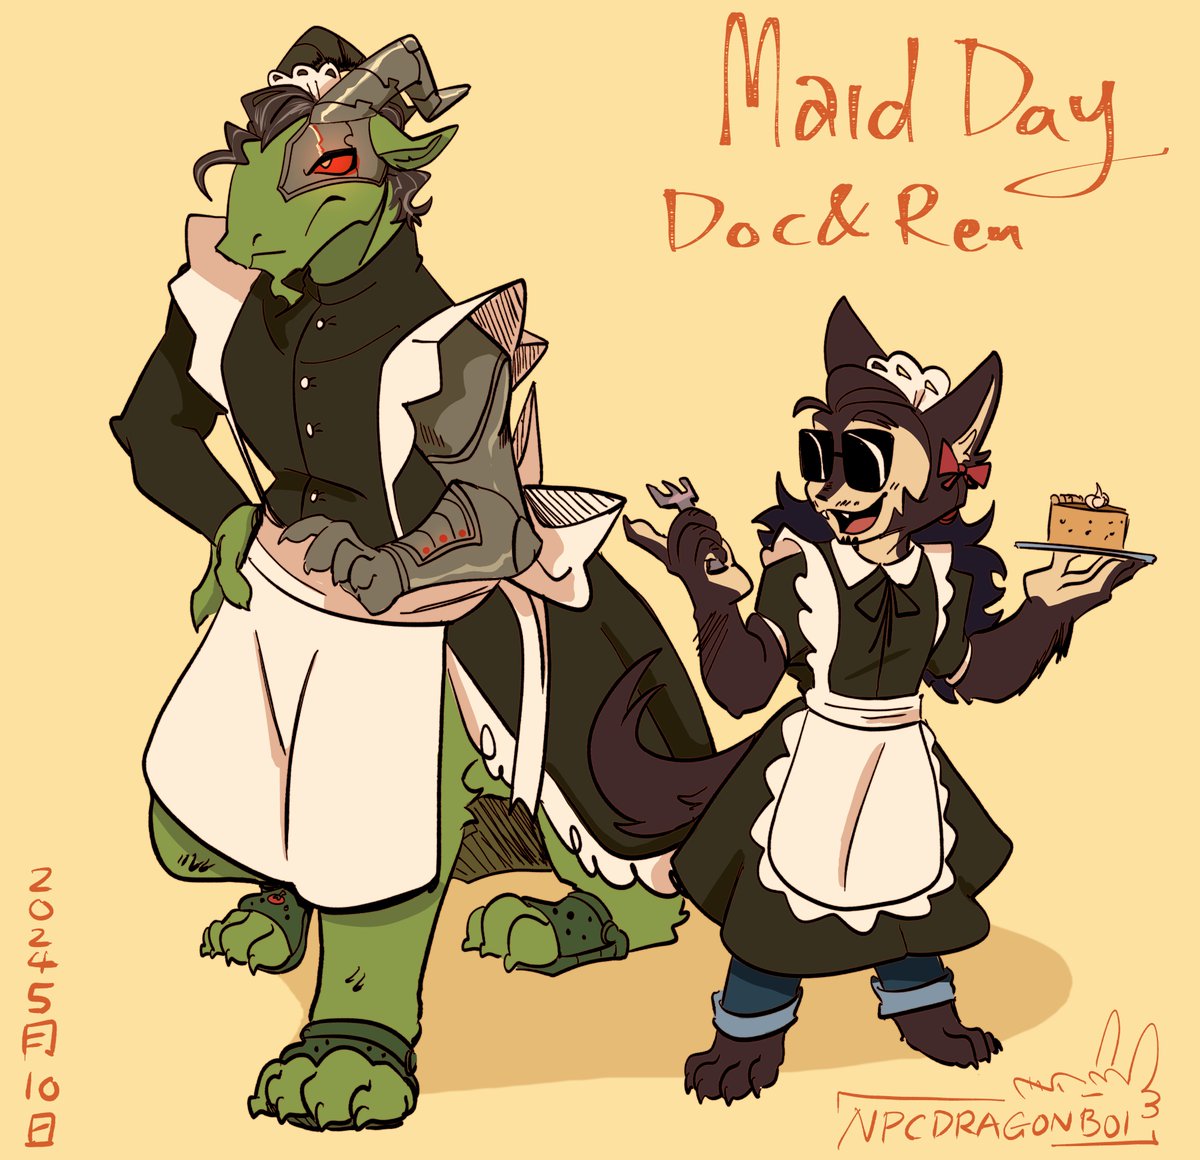 So is Maid Day? Happy Maid day with Docm77 & Rendog :] I didn't get to join the Maid Doc trend happening in Tumblr #docm77fanart #rendogfanart